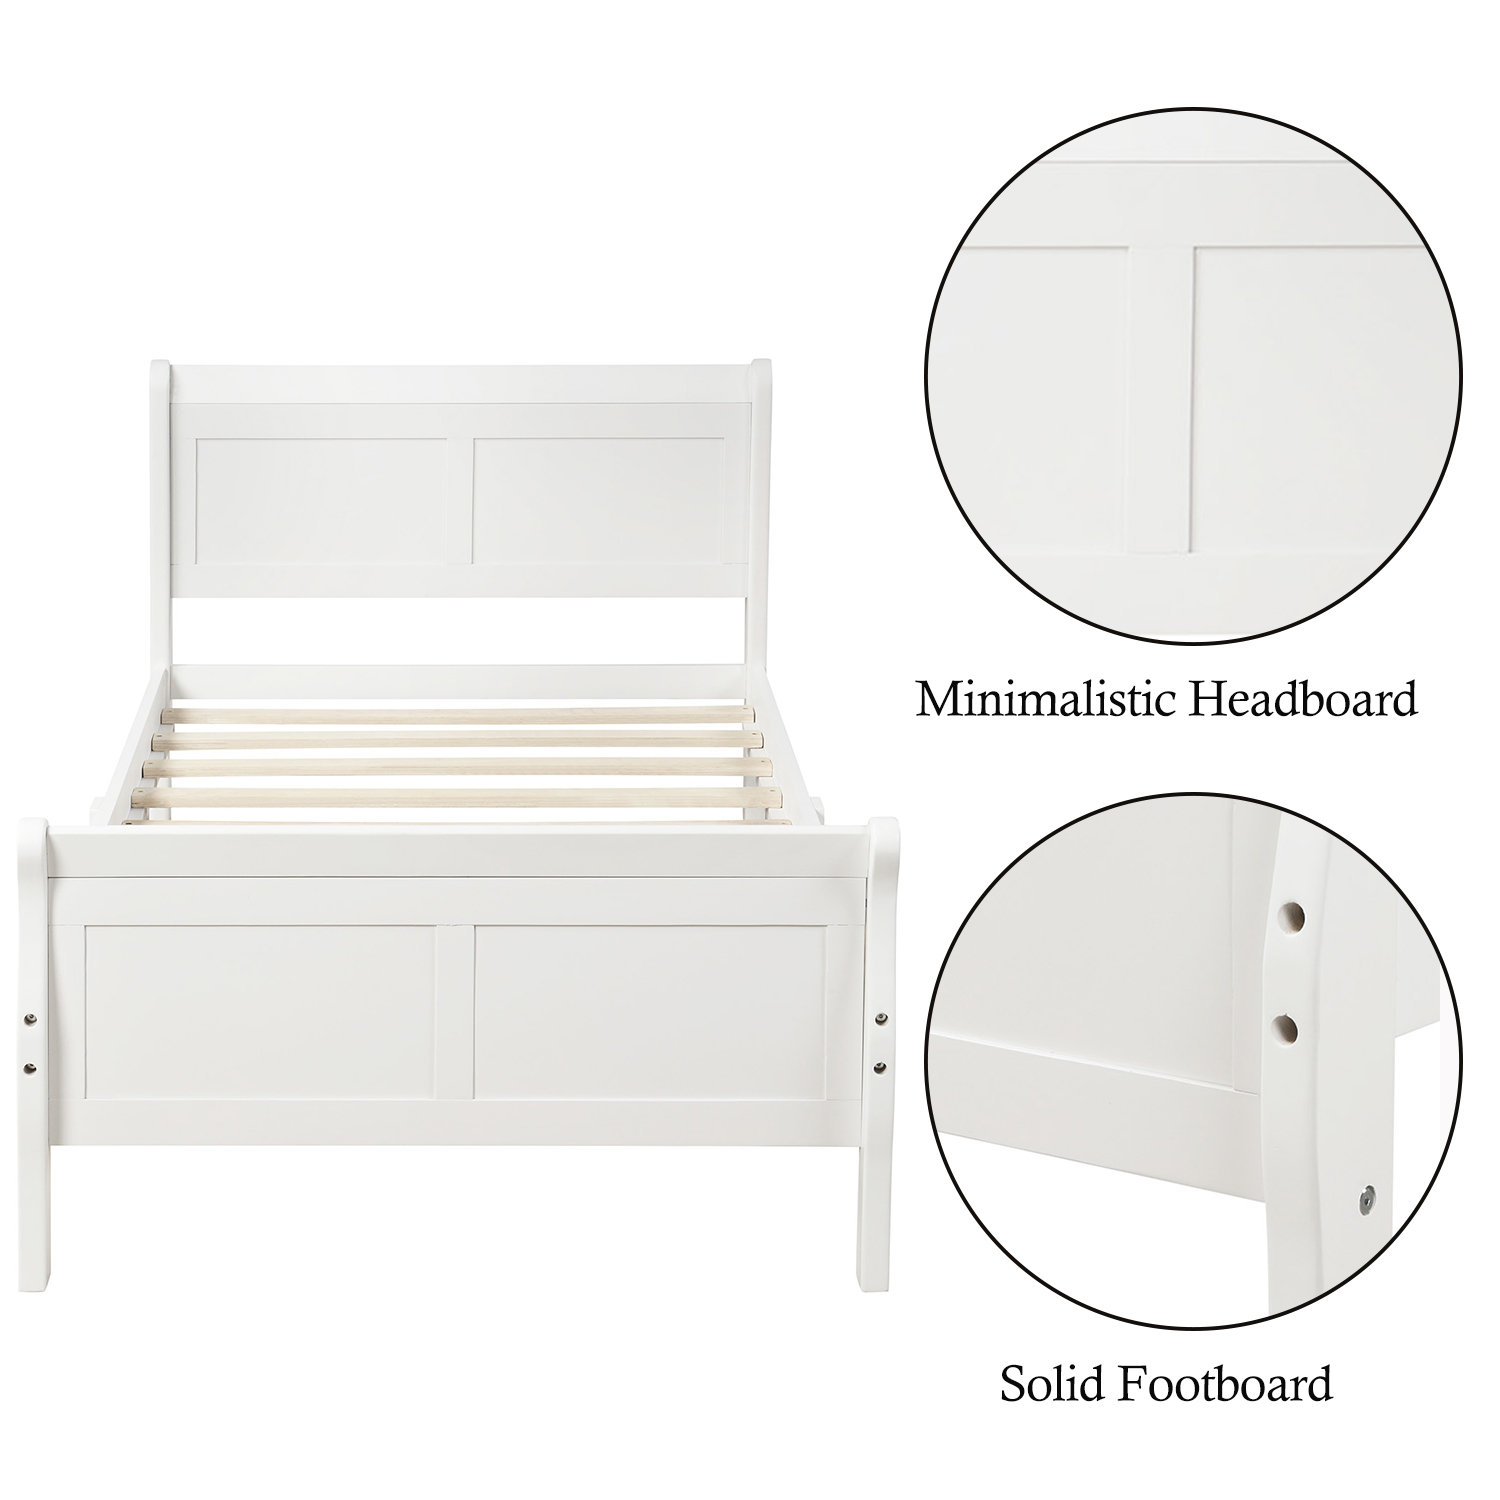 Twin Bed Frame No Box Spring Needed, Wood Platform Bed Frame with Headboard and Footboard, Strong Wooden Slats, Twin Bed Frames for Kids, Adults, Modern Bedroom Furniture, White, W9772 - image 4 of 8